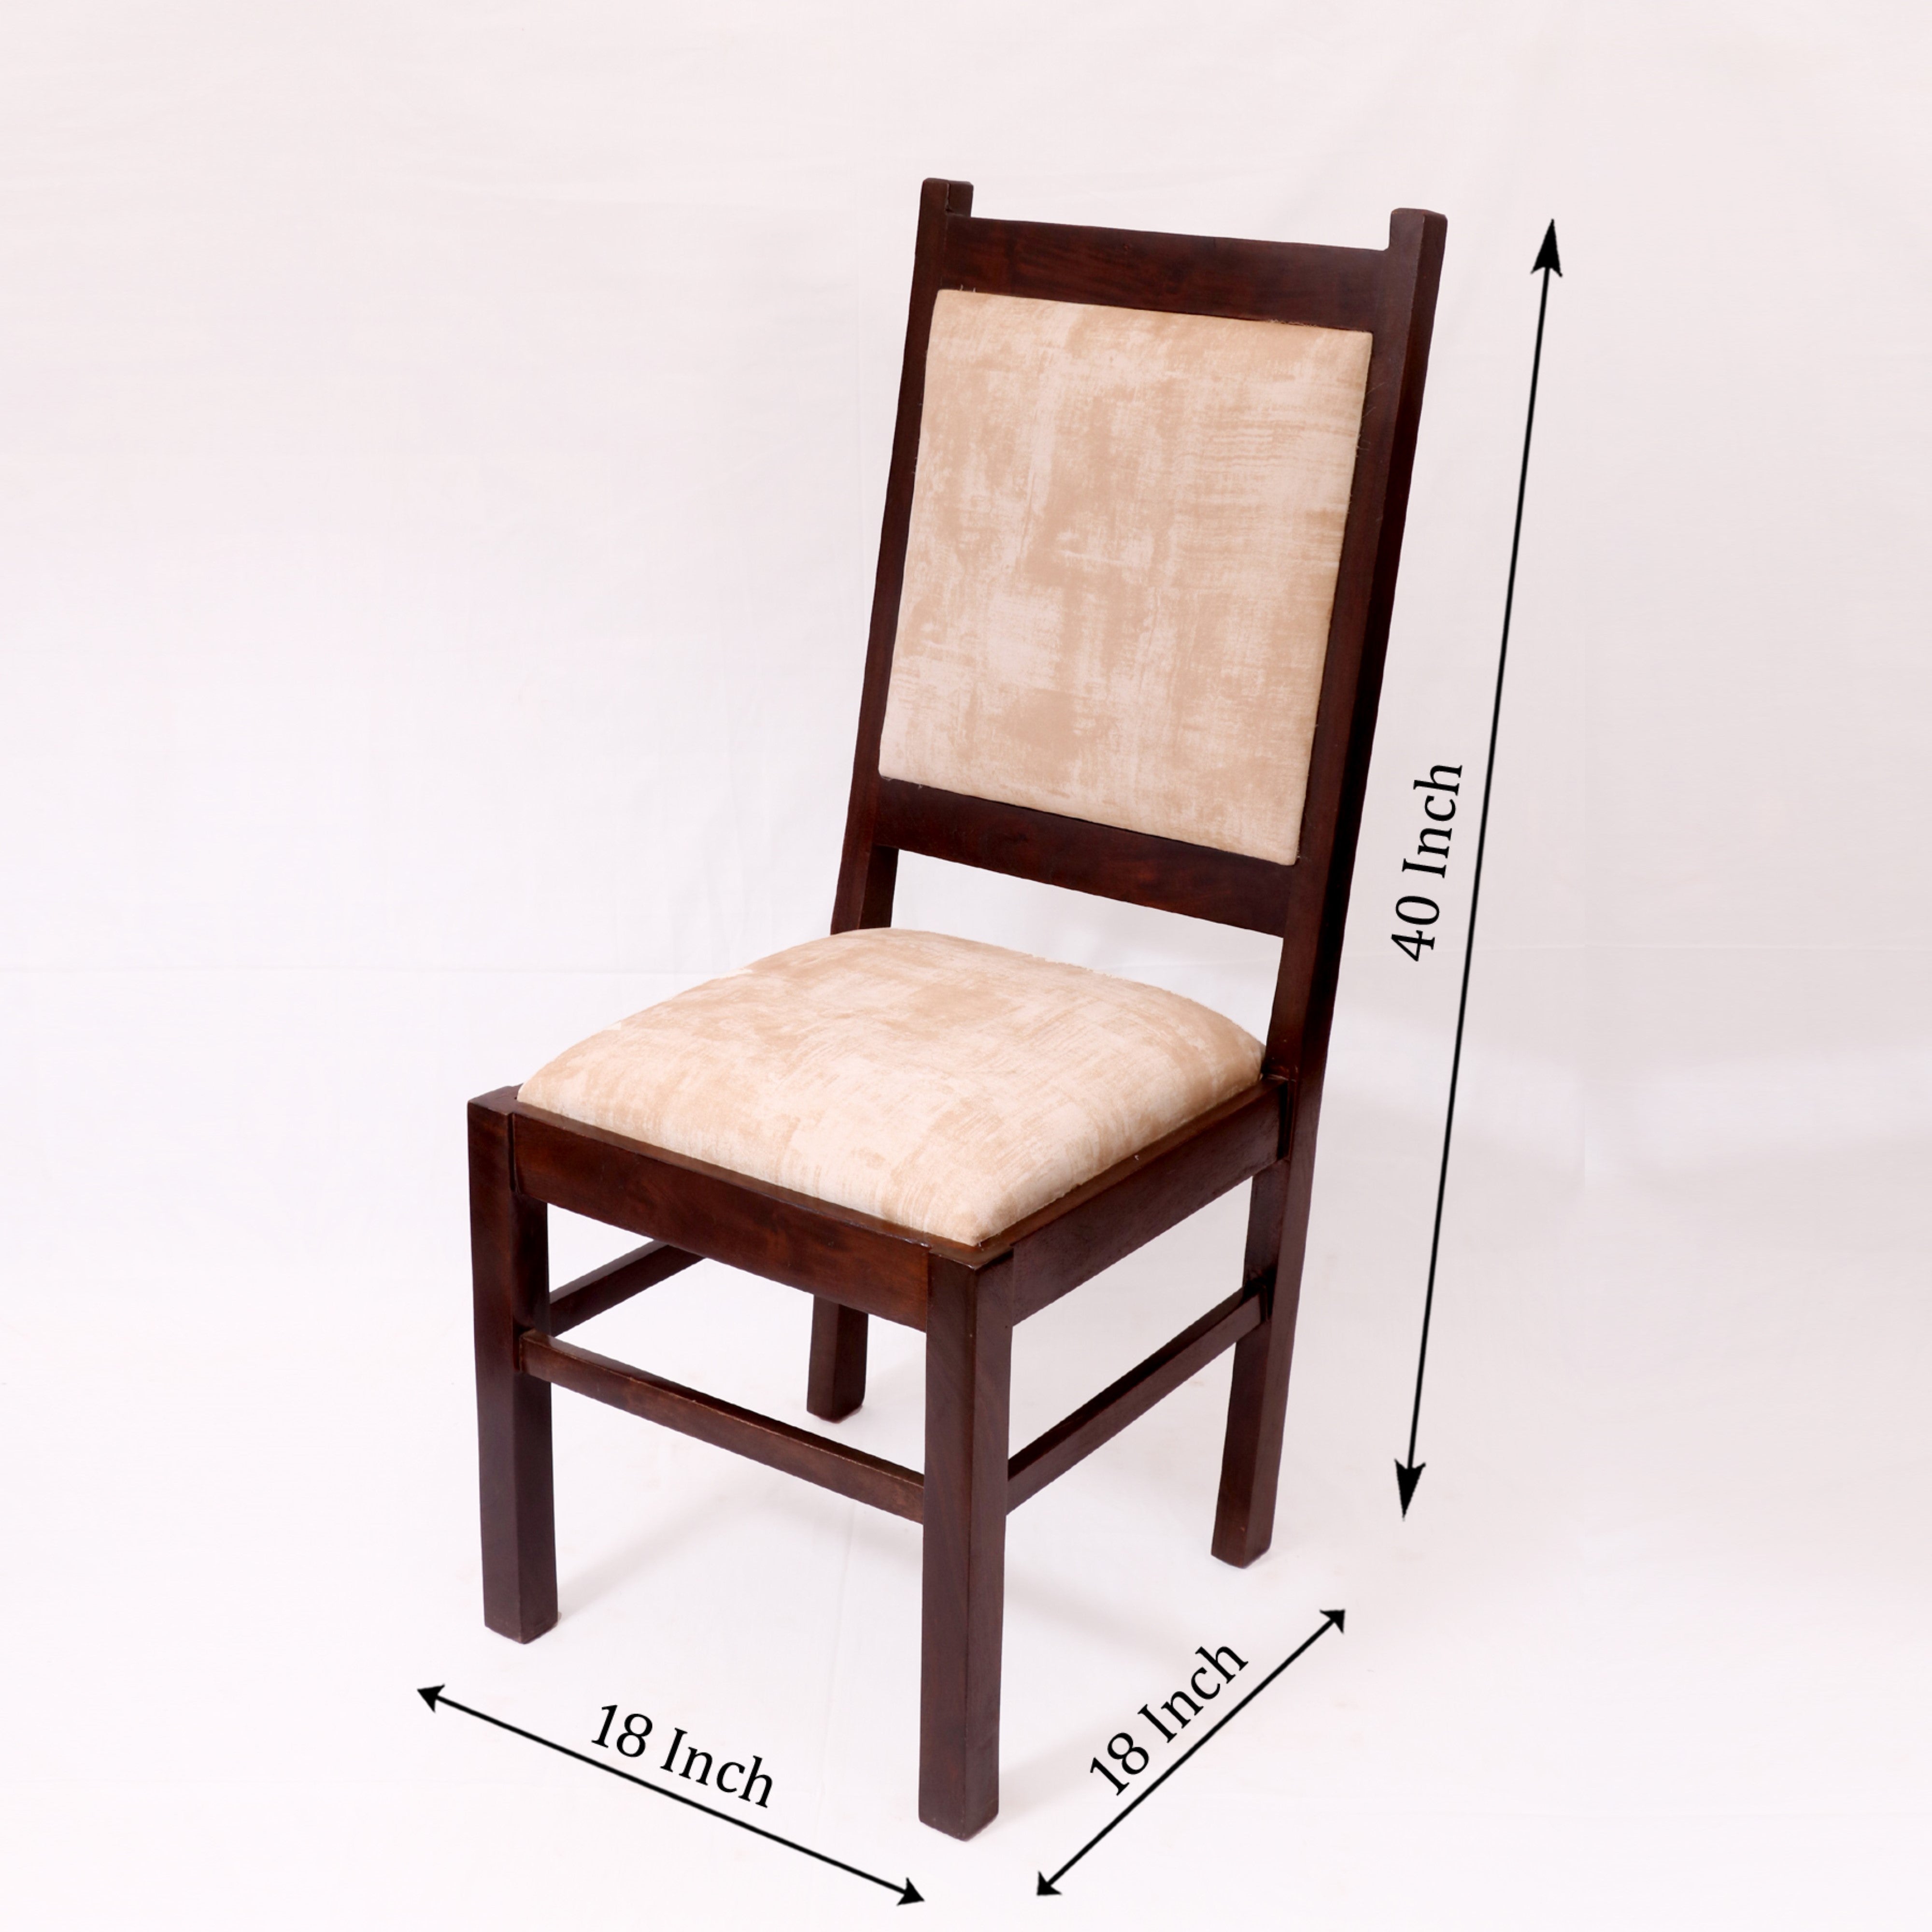 (Set of 2) Plan 2 Side Relief Chair Dining Chair